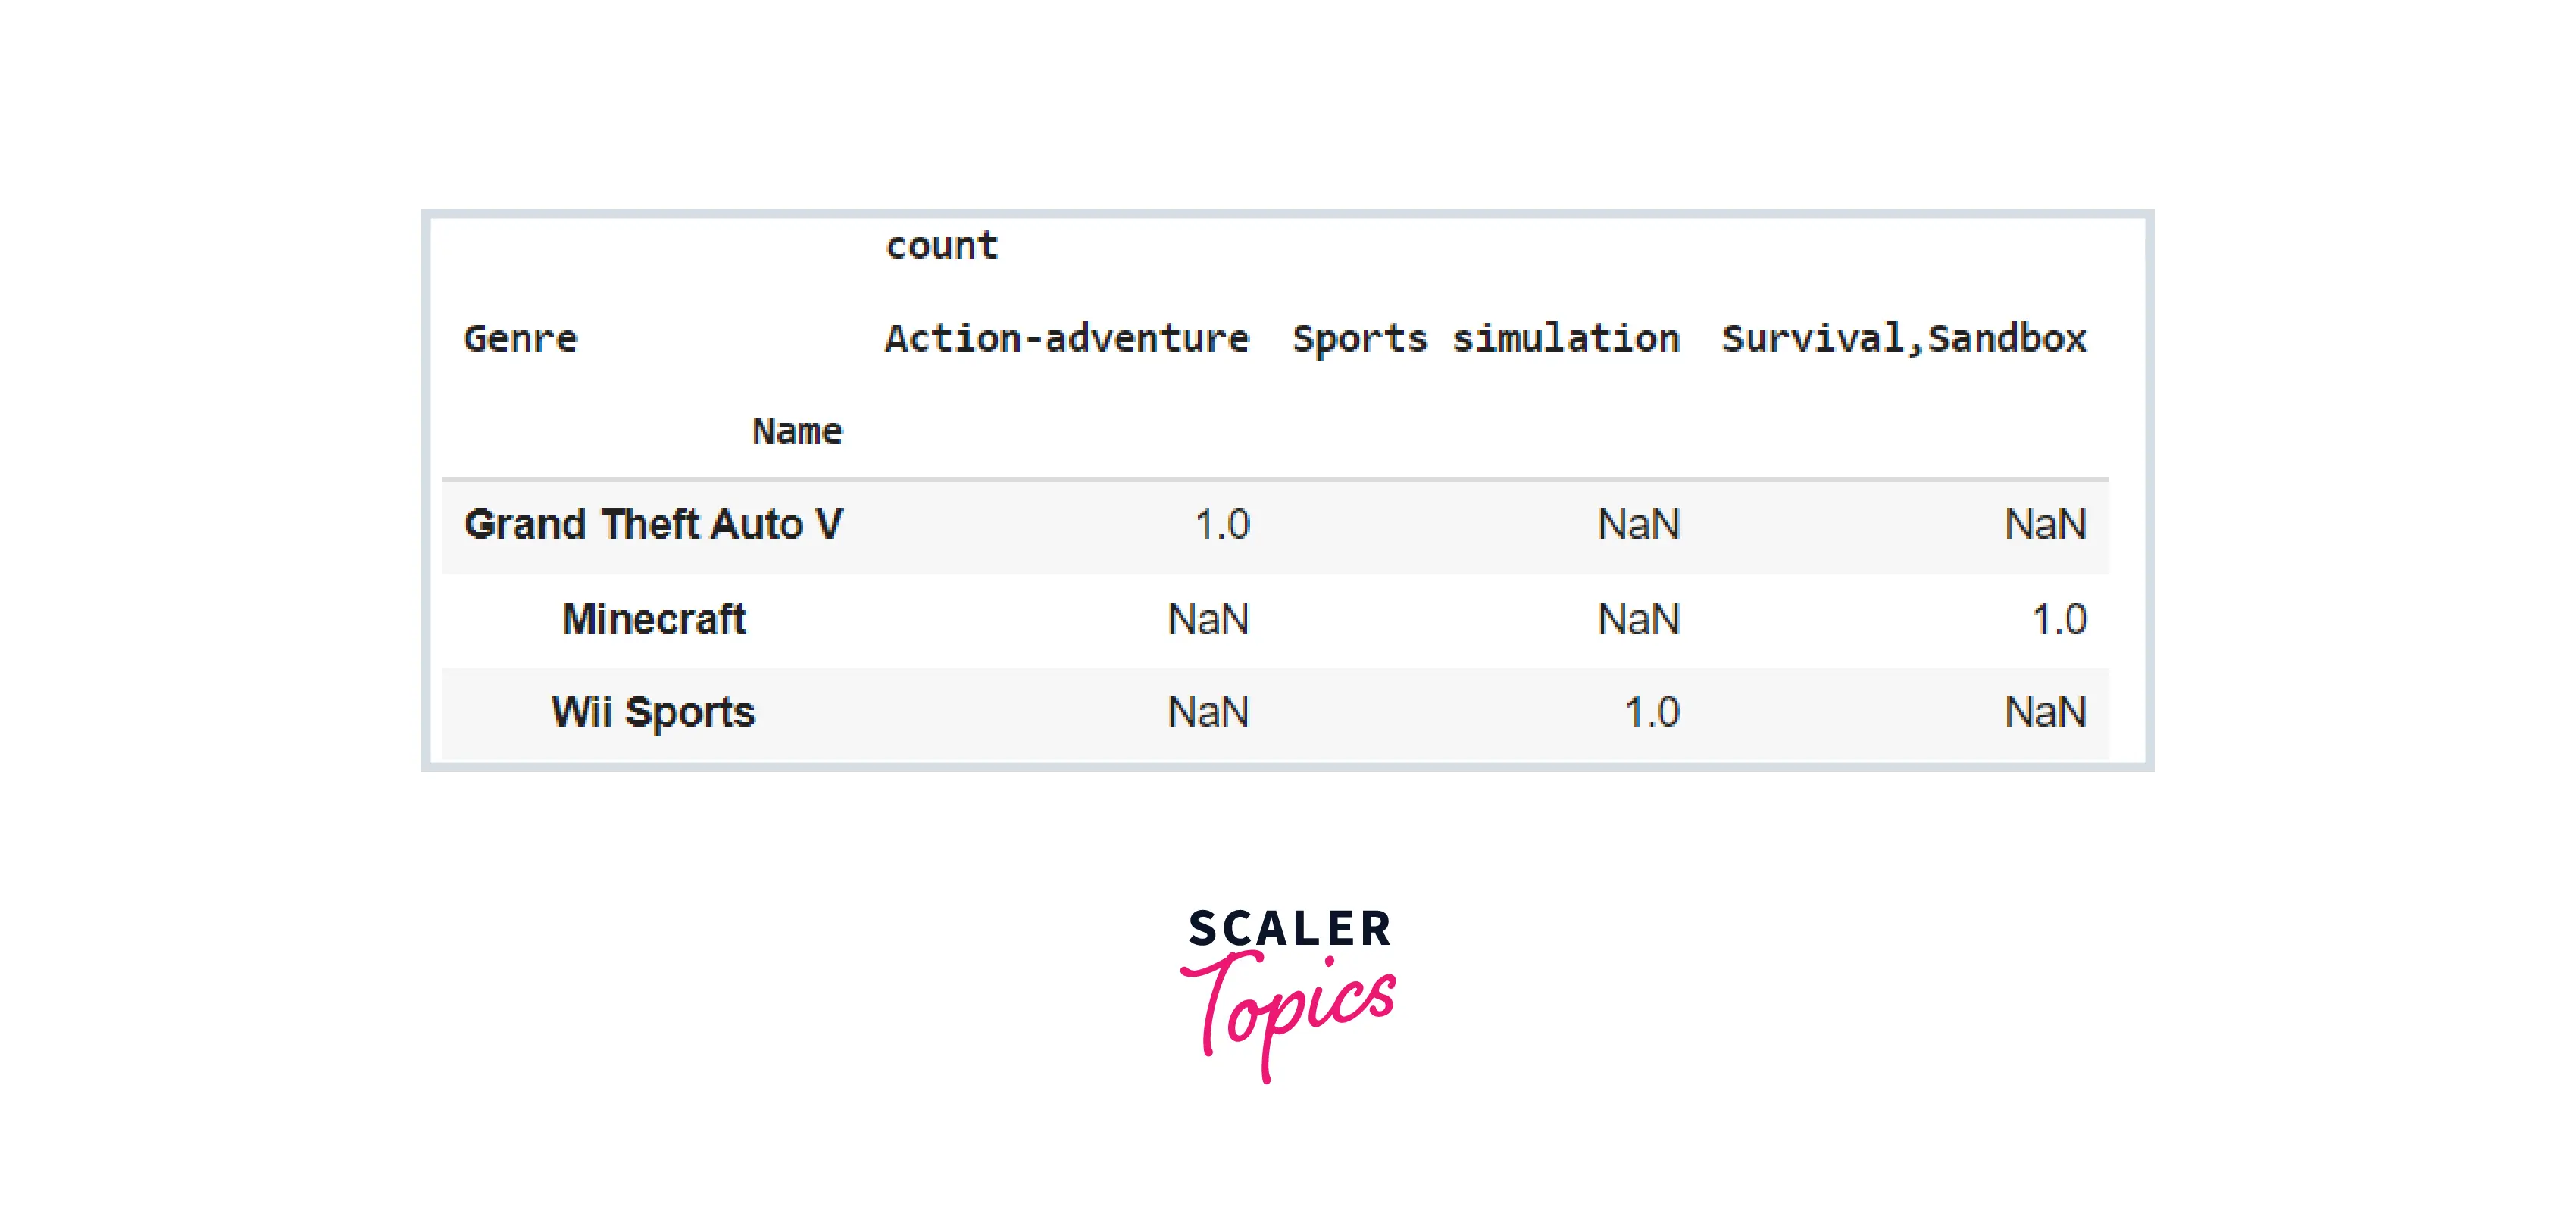 Aggregate on Specific Features with Values Parameter